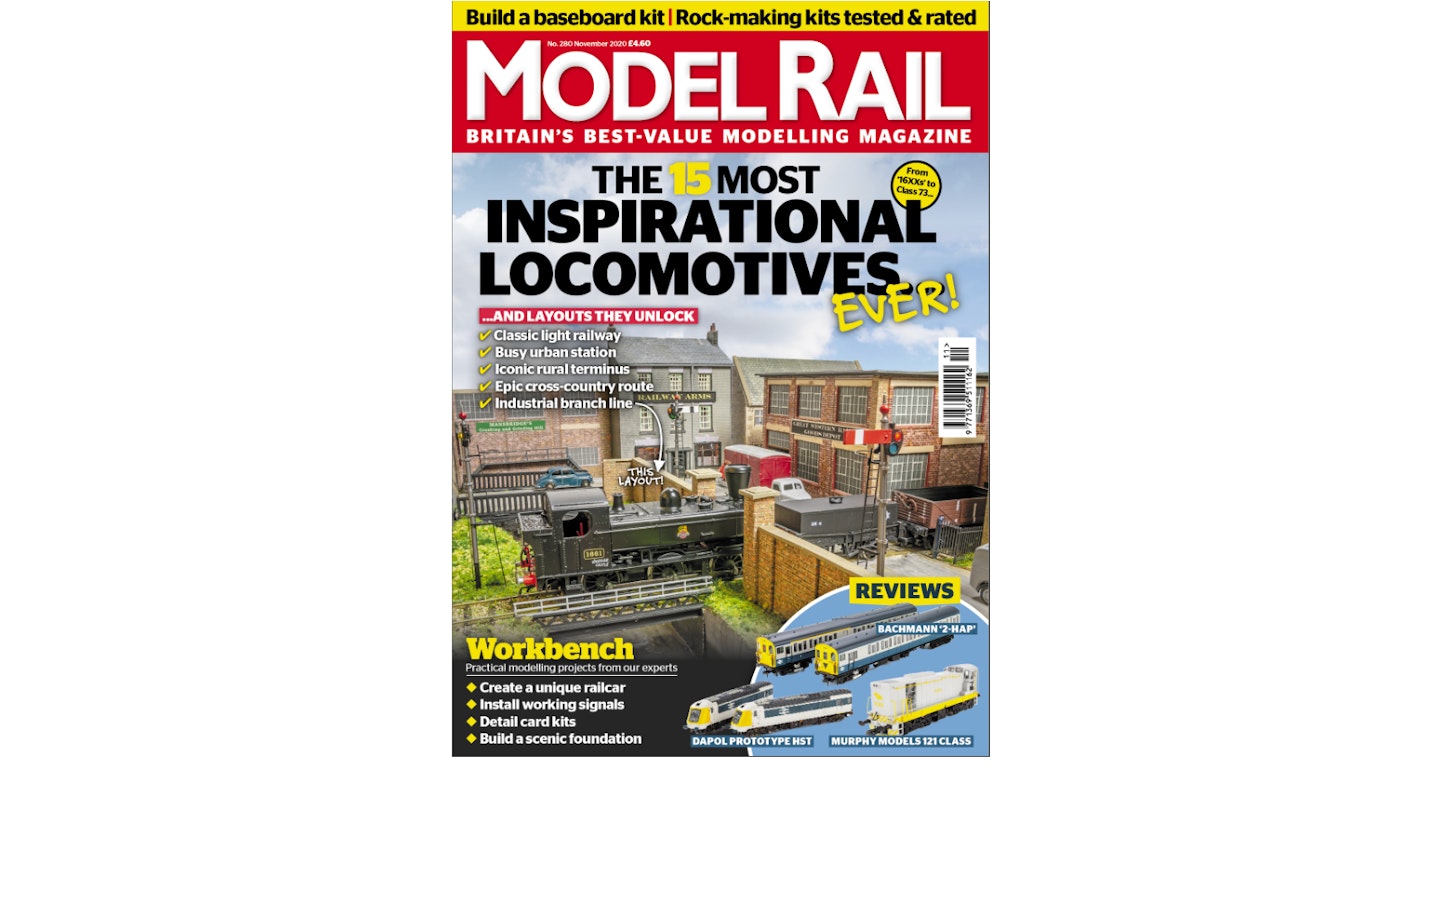 The latest issue of Model Rail...